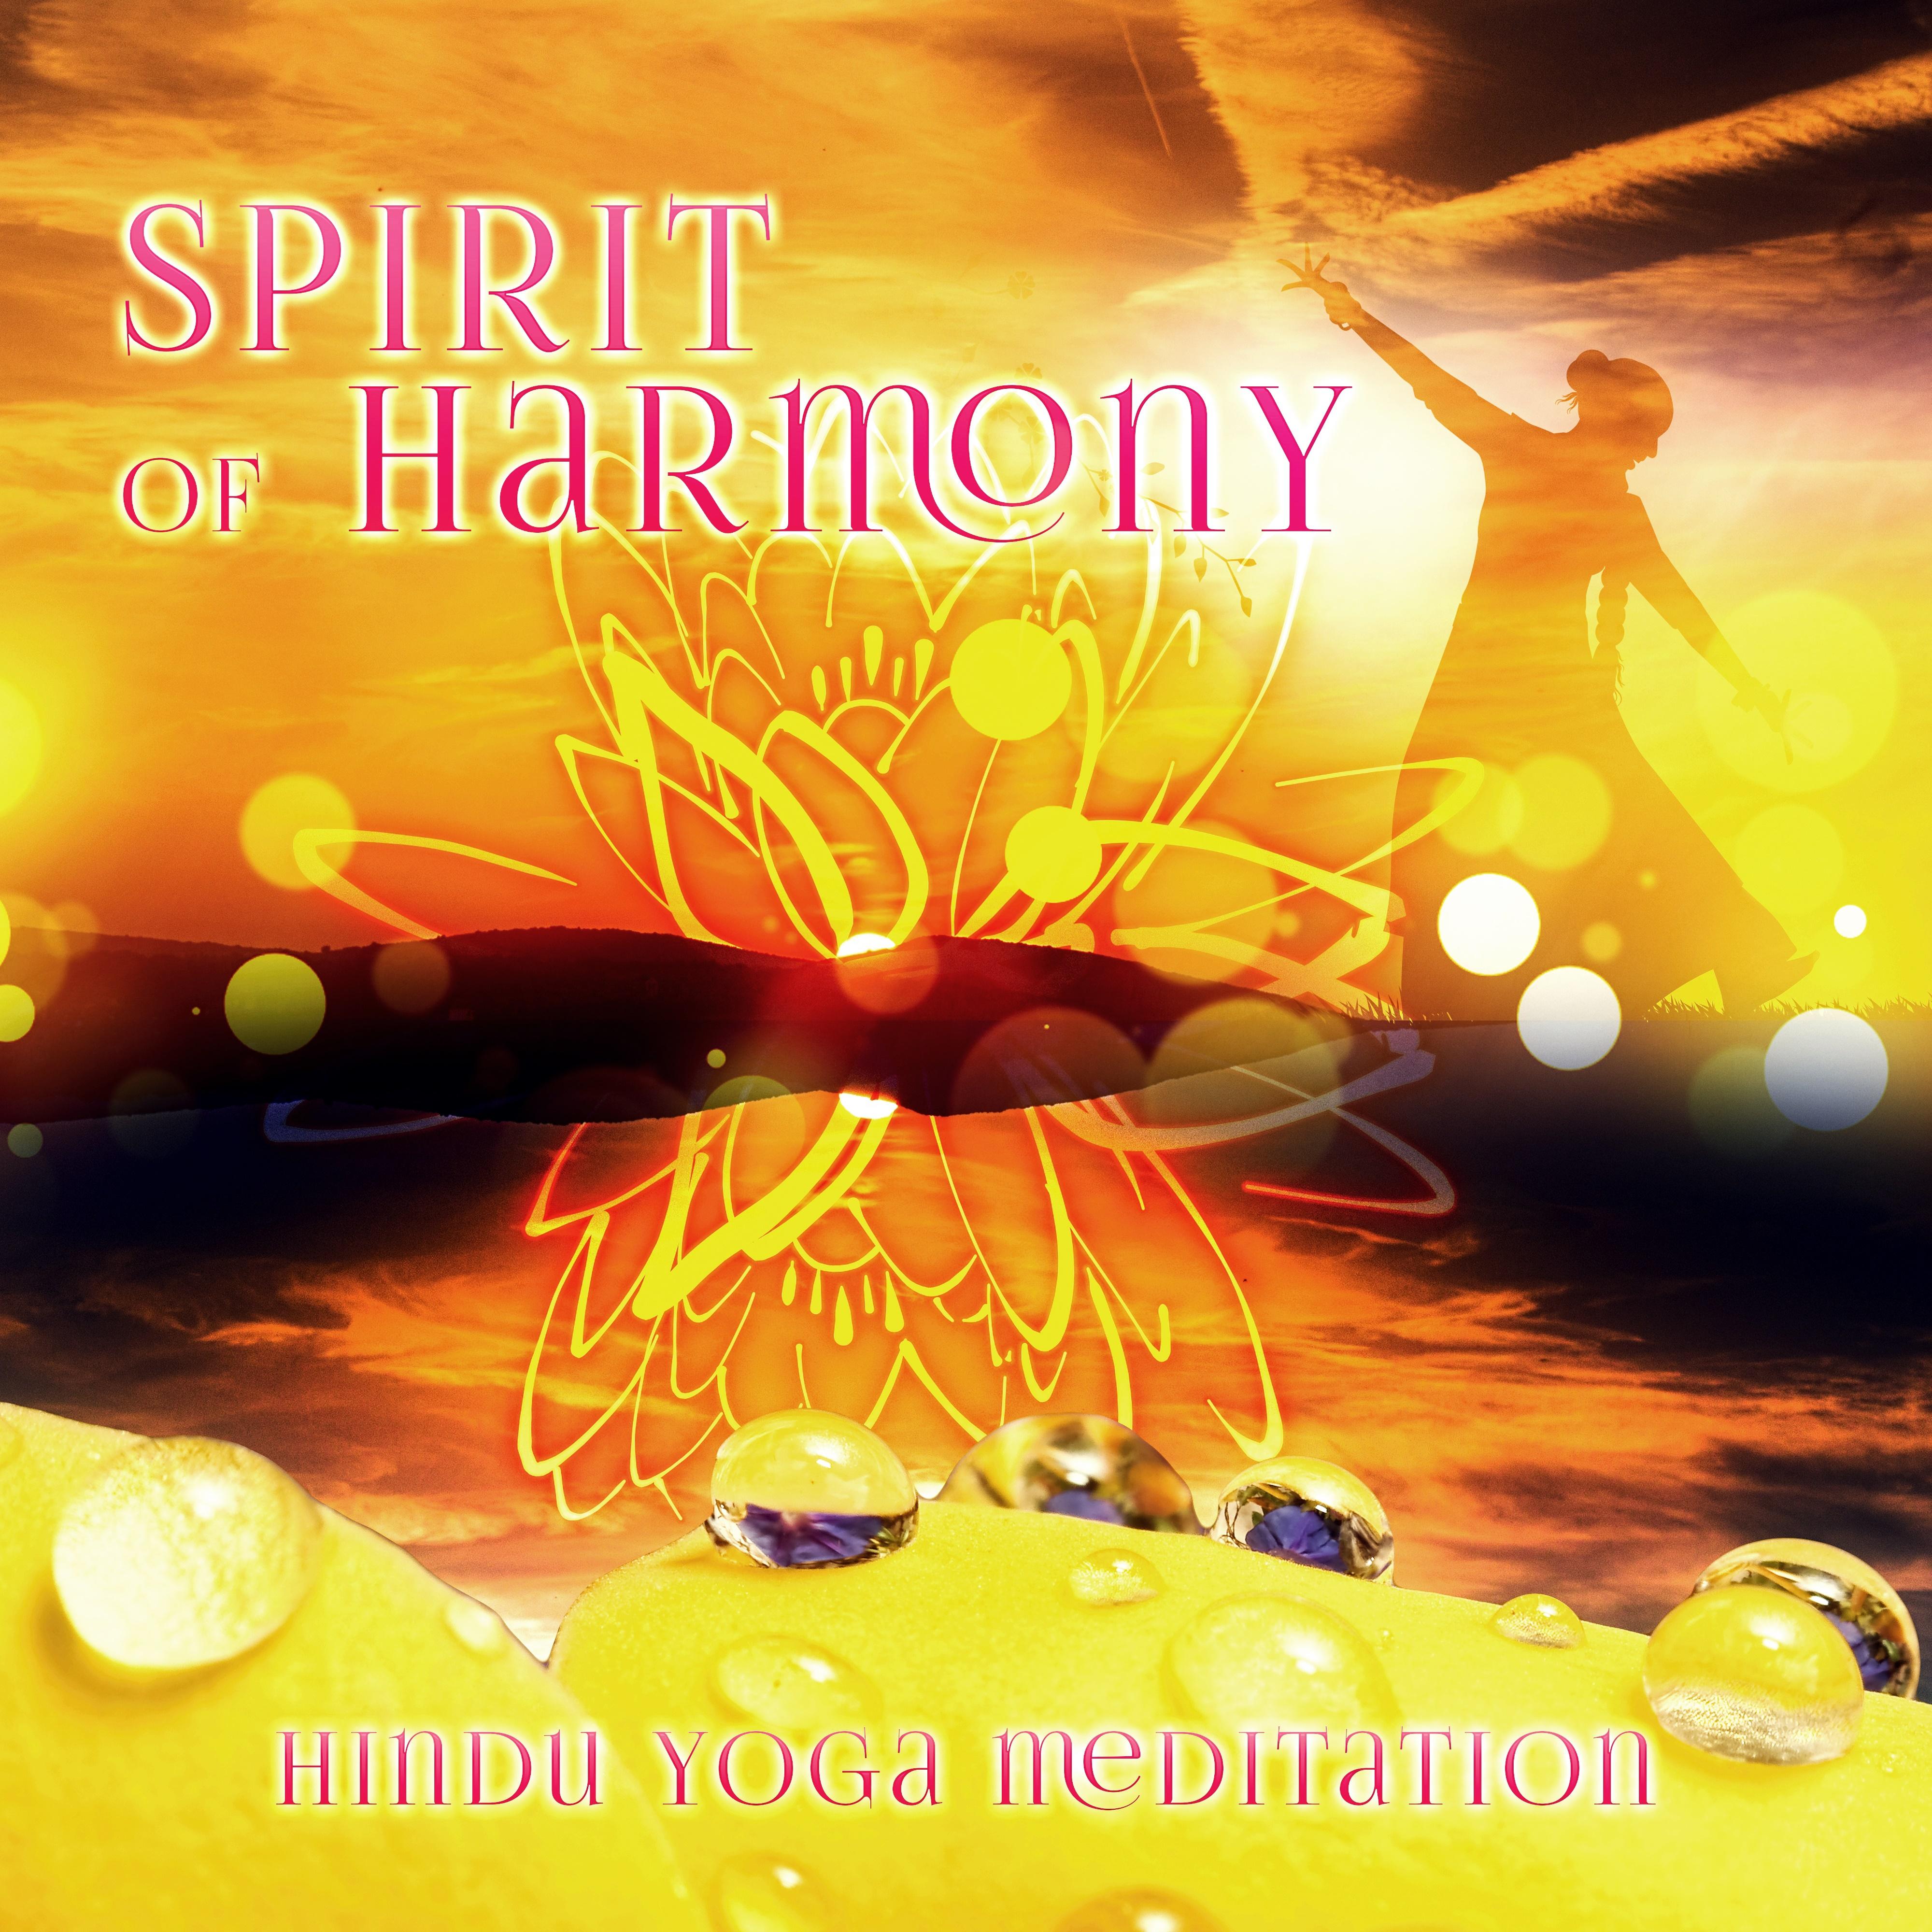 Spirit of Harmony - Hindu Yoga, Mindfulness Meditation & Relaxation with Flute Music and Nature Sounds, Inspiring Piano Music